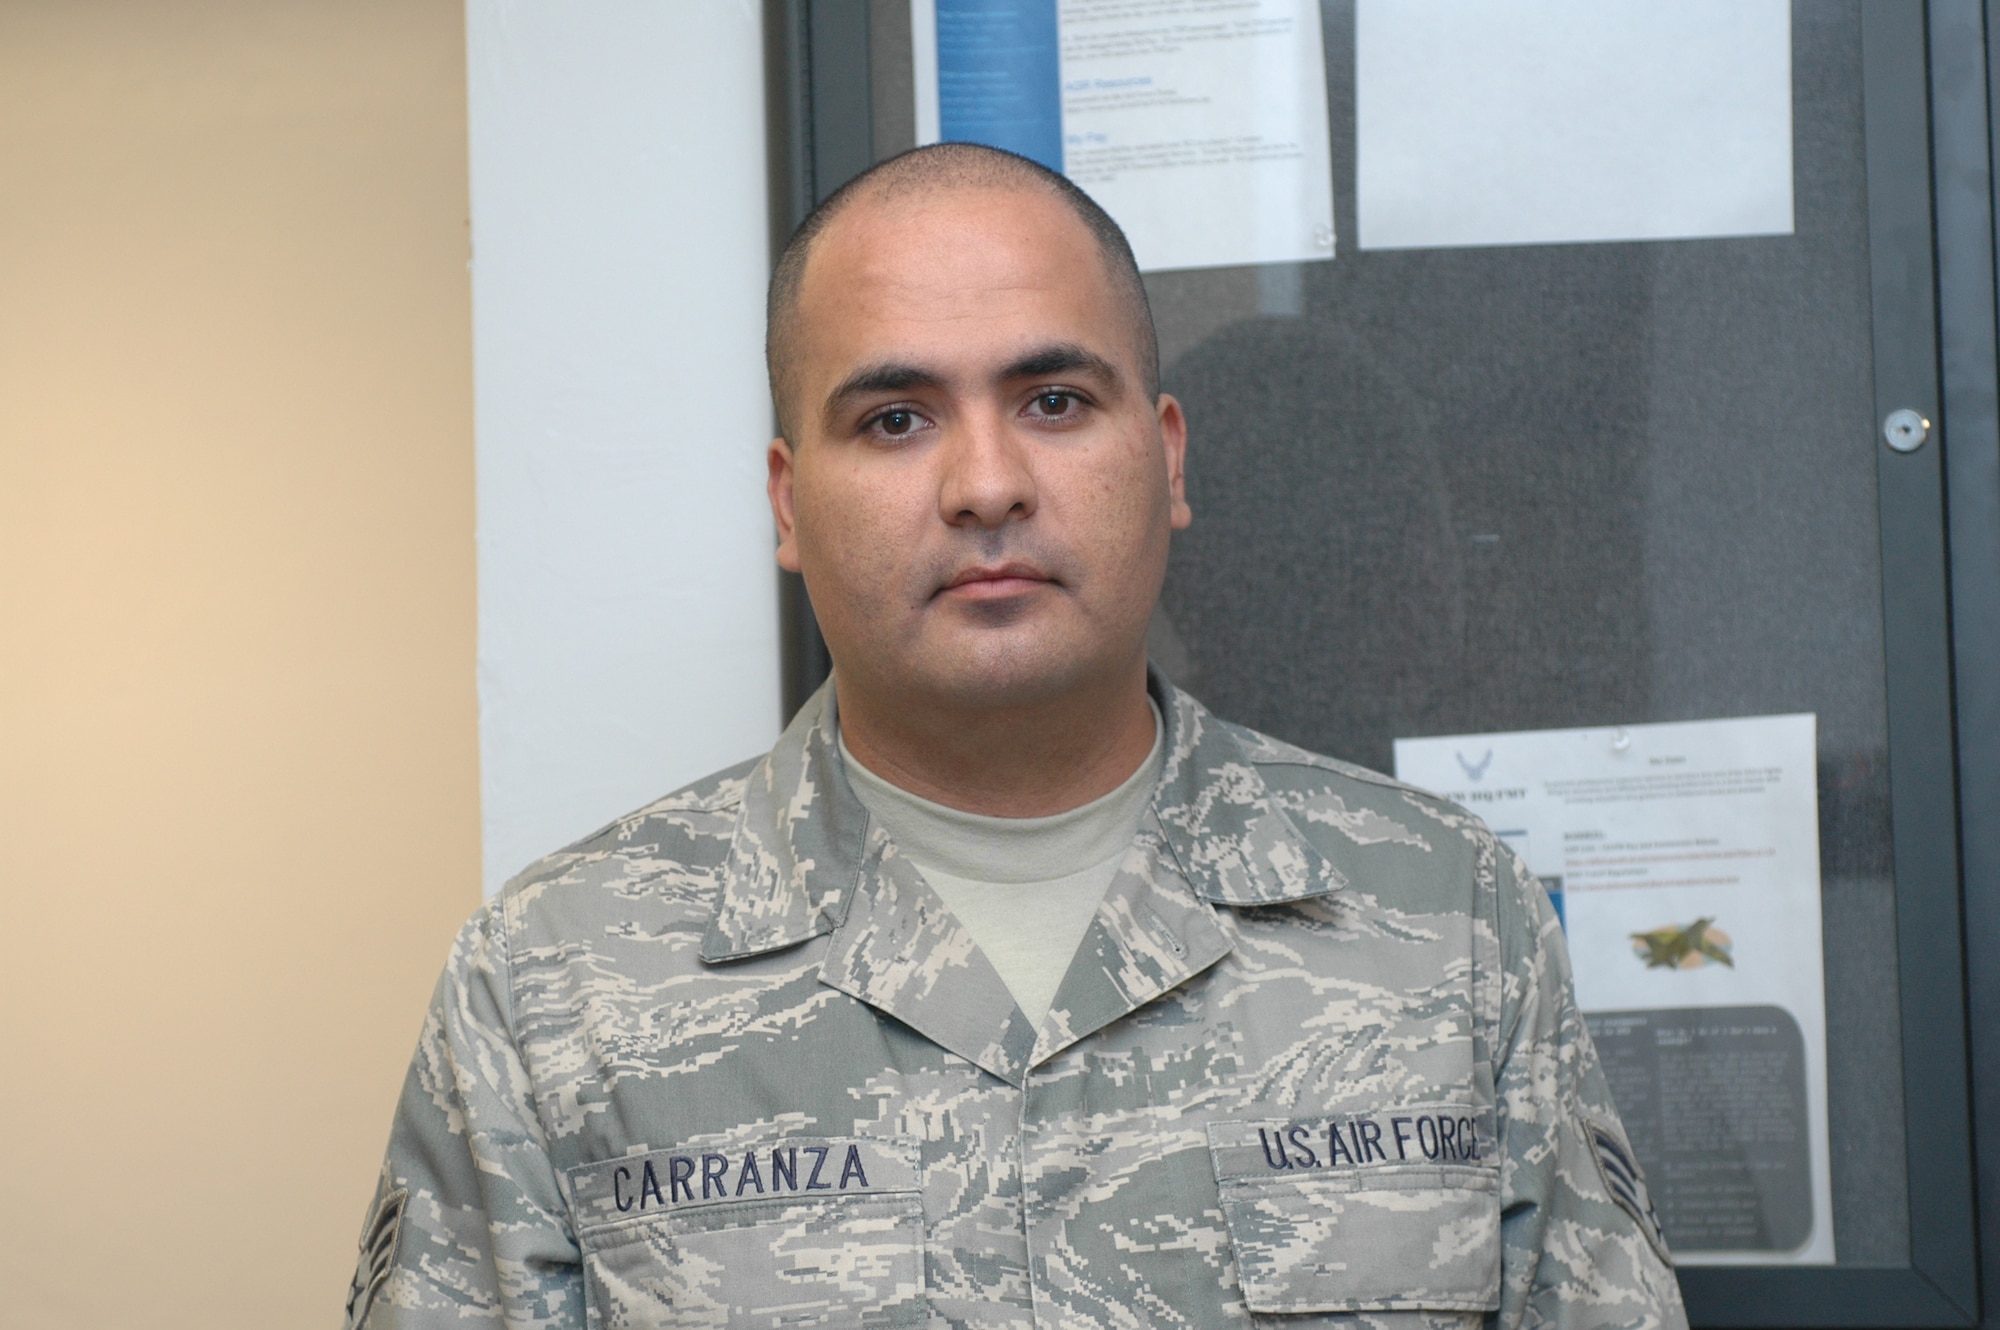 Senior Airman Ruben Carranza, 162nd Financial Management - Airman Carranza was listening to the radio at a civilian job when he found out about the attacks. Having no access to a television, he didn’t actually know what happened until his wife picked him up from work. The first words to come out of her mouth were about the attacks. They spent the rest of the day watching the news. “I remember just watching the news for the whole afternoon with my wife. We just kept watching the replay of the towers falling over and over again. I think we fell asleep watching the news without talking about anything else. It was that big of an impact.” (Air Force photo by Airman 1st Class Krystal Tomlin) 
